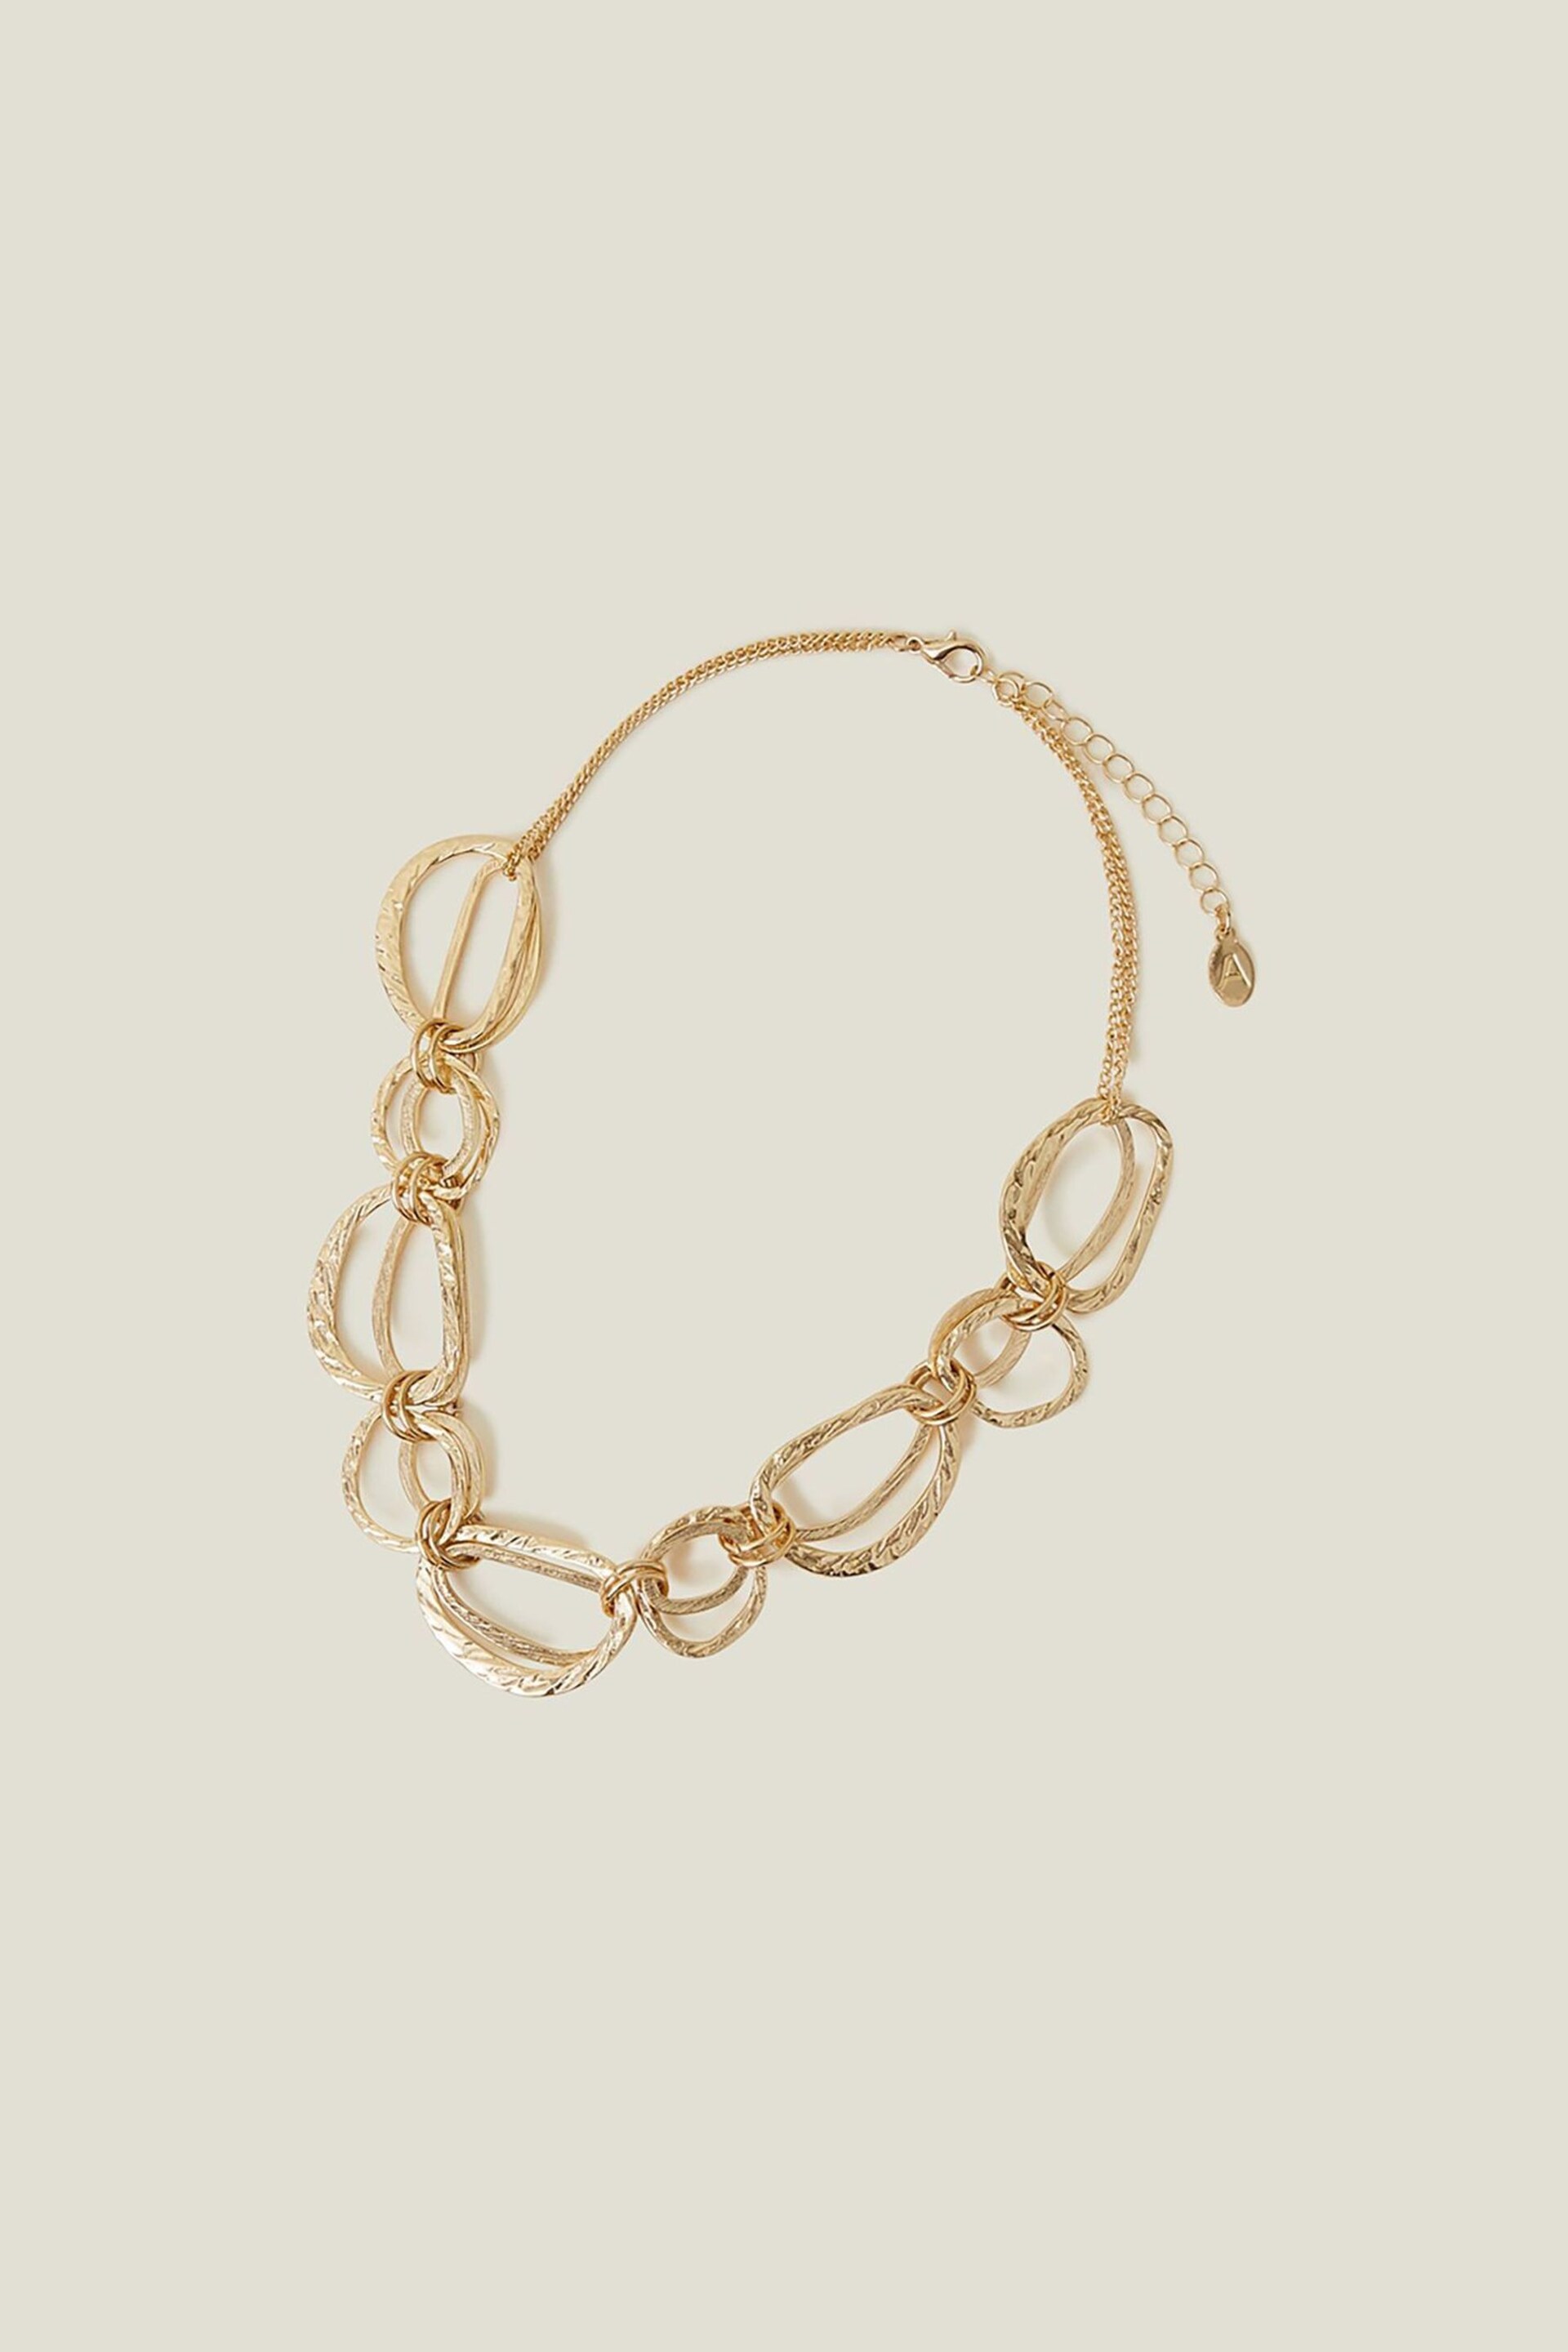 Accessorize Gold Tone Textured Metal Circle Necklace - Image 1 of 3